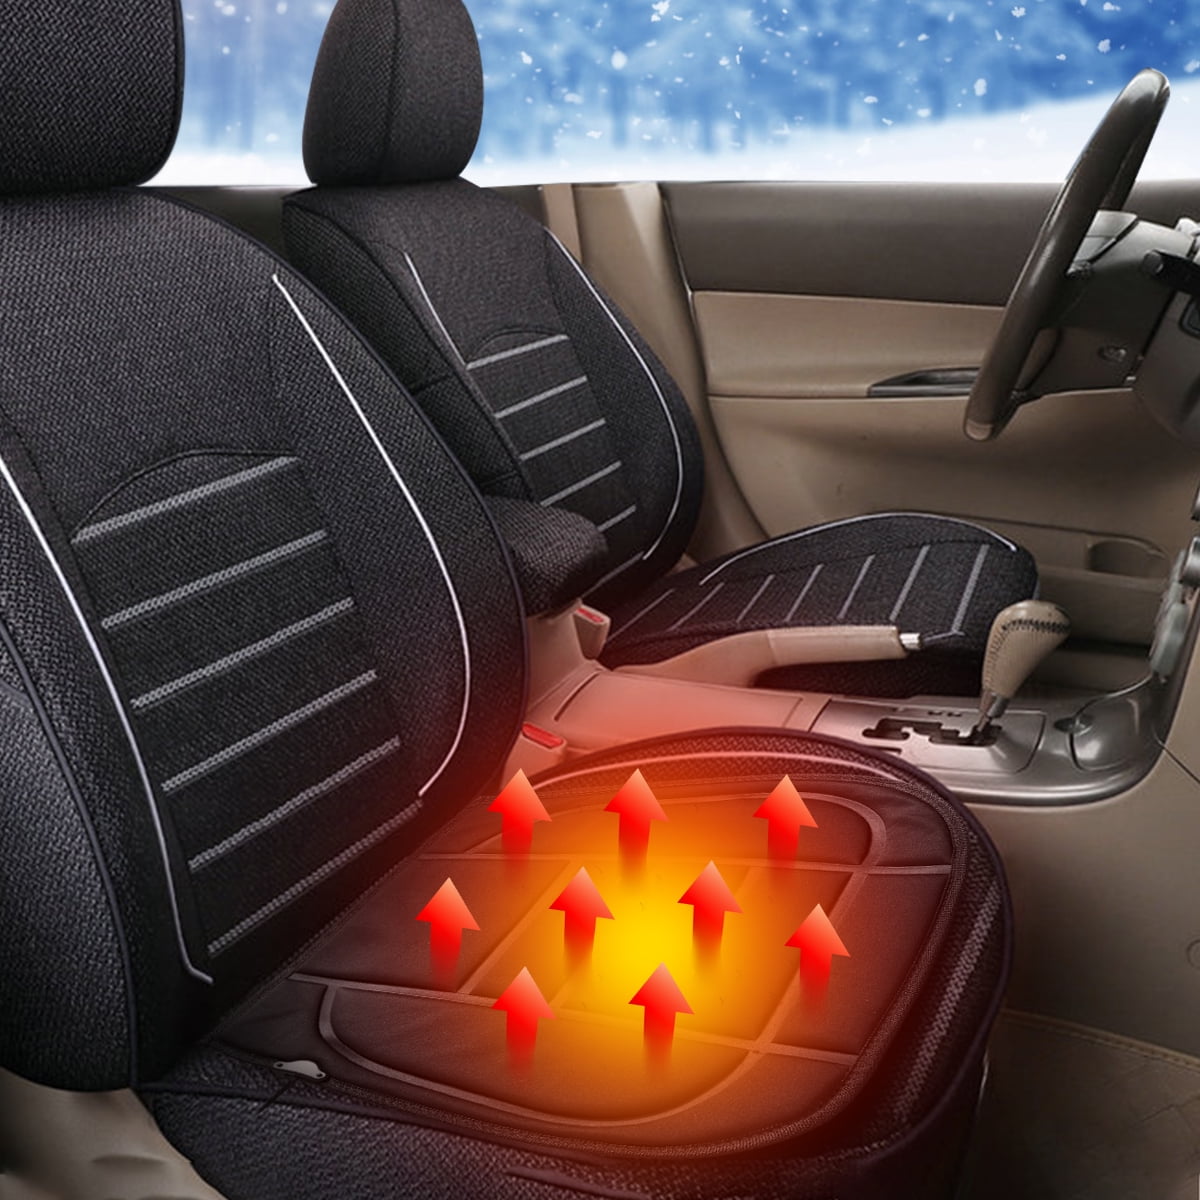 Universal 12V Car Truck Seat Heater Nonslip Heating Pad Winter Warmer Universal Fit for Auto Supplies Home Office Chair,Pink Heated Seat Cushion 